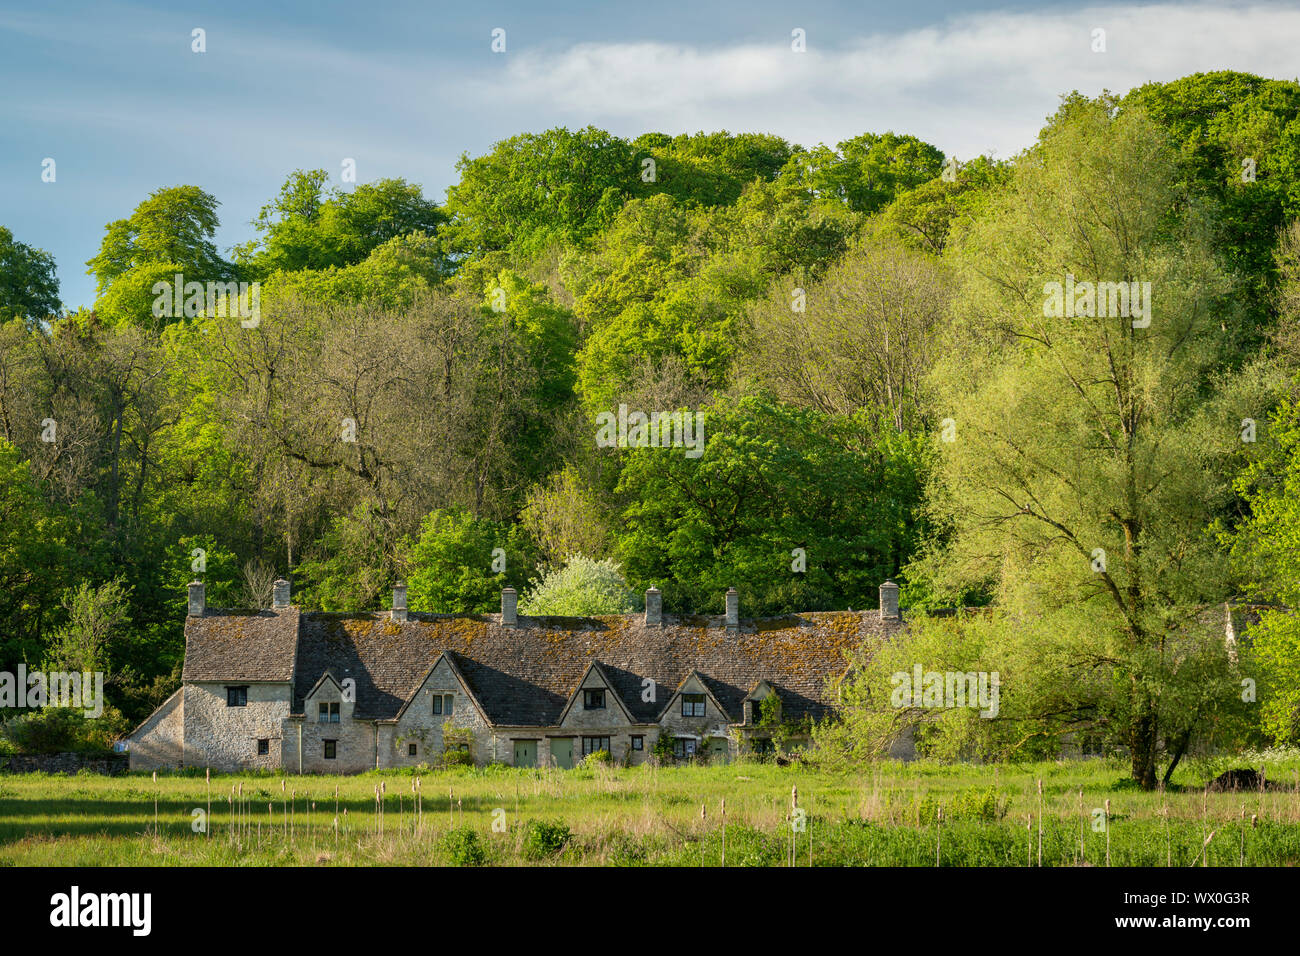 Arlington Row cottages in the pretty Cotswolds village of Bibury, Gloucestershire, England, United Kingdom, Europe Stock Photo